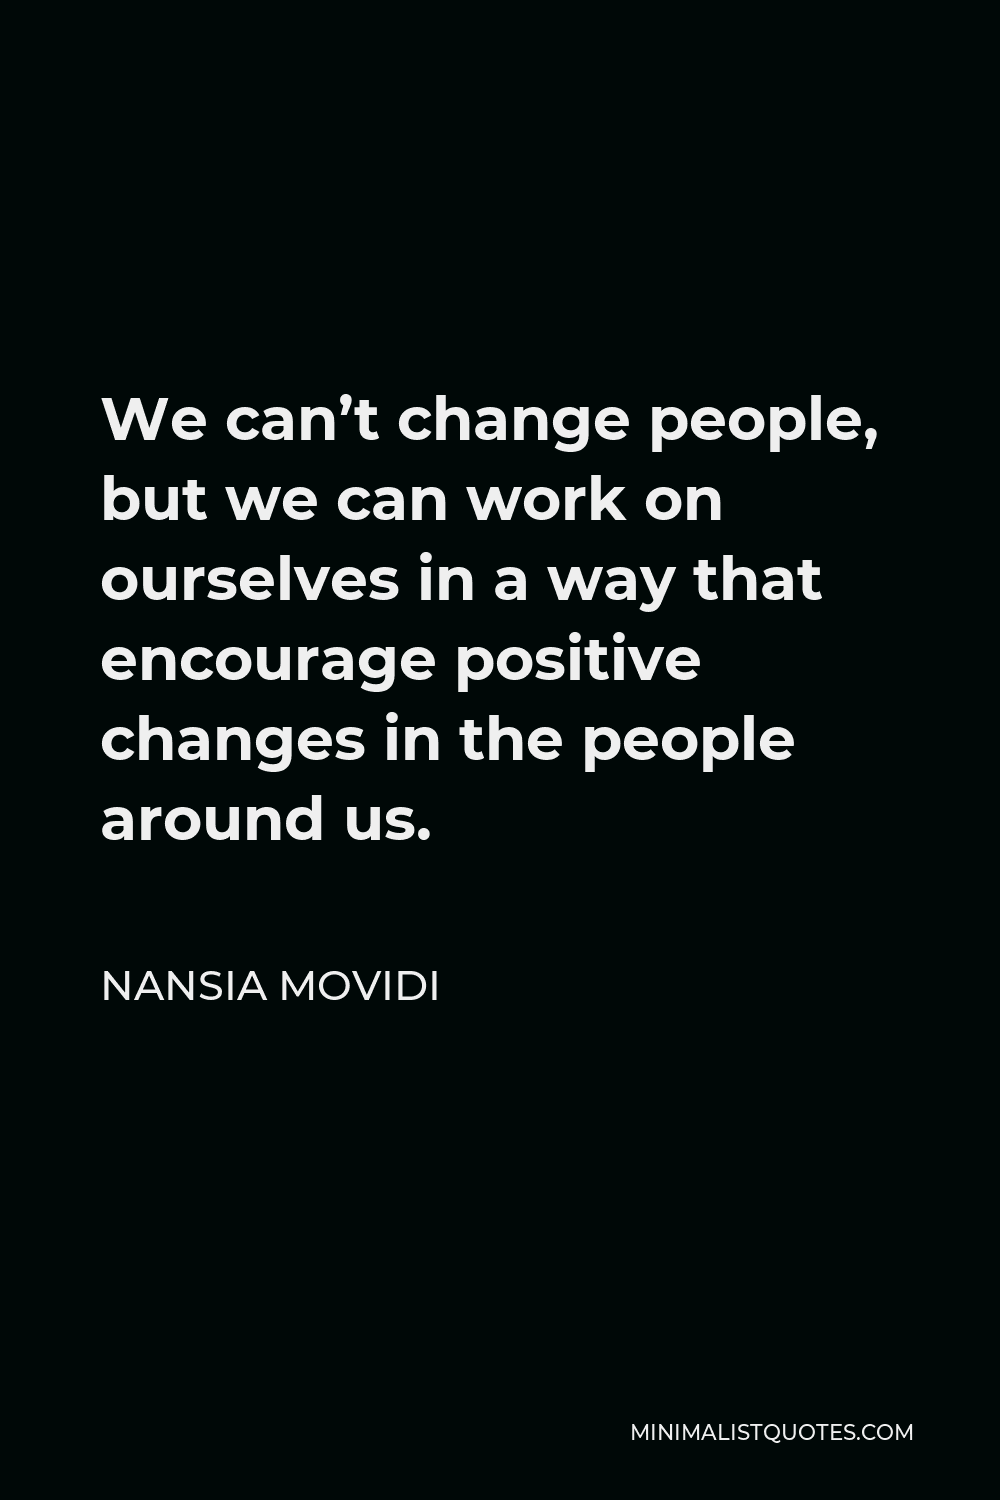 Nansia Movidi Quote - We can’t change people, but we can work on ourselves in a way that encourage positive changes in the people around us.